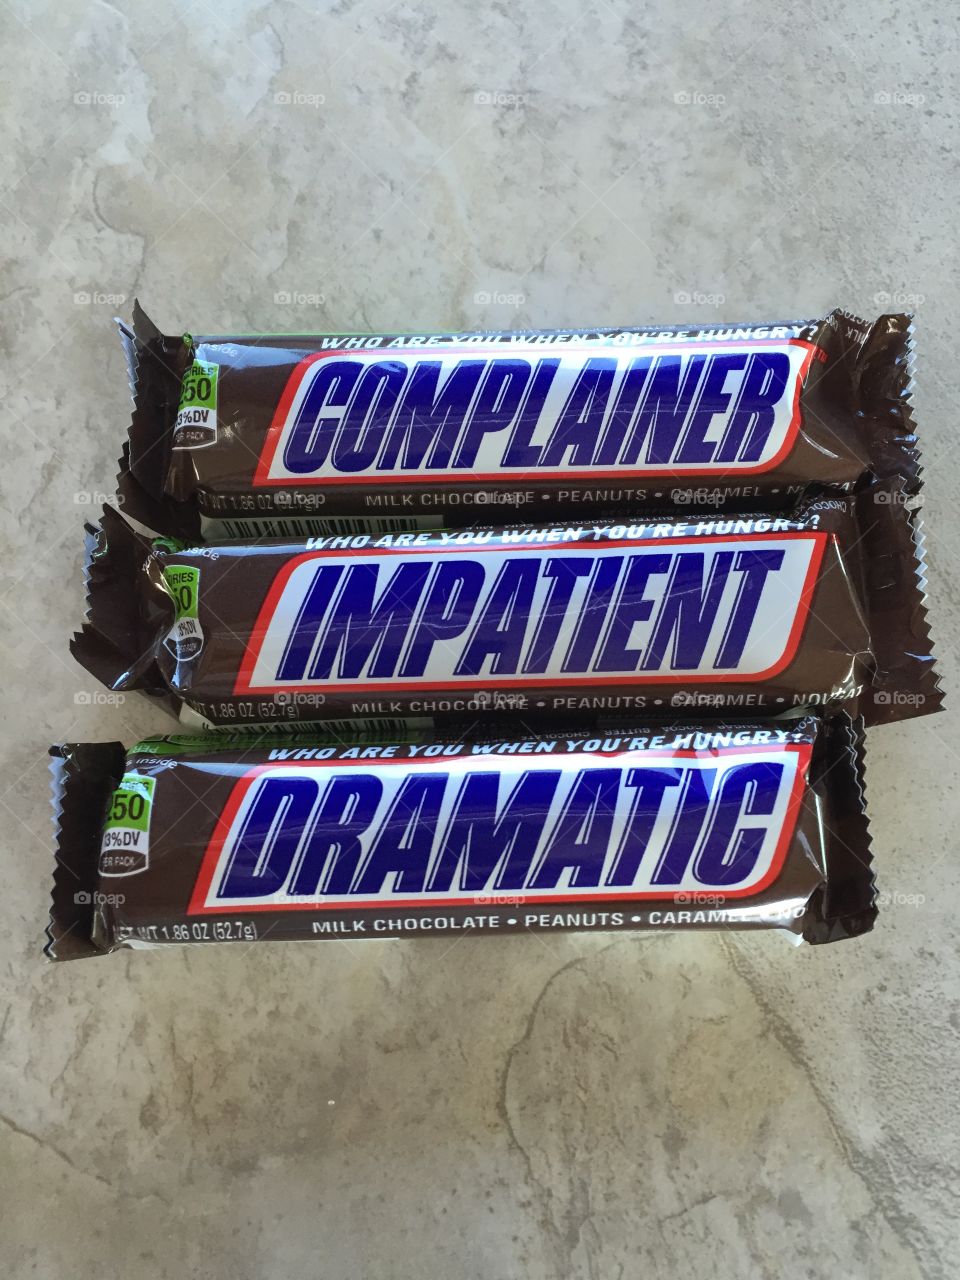 snickers!